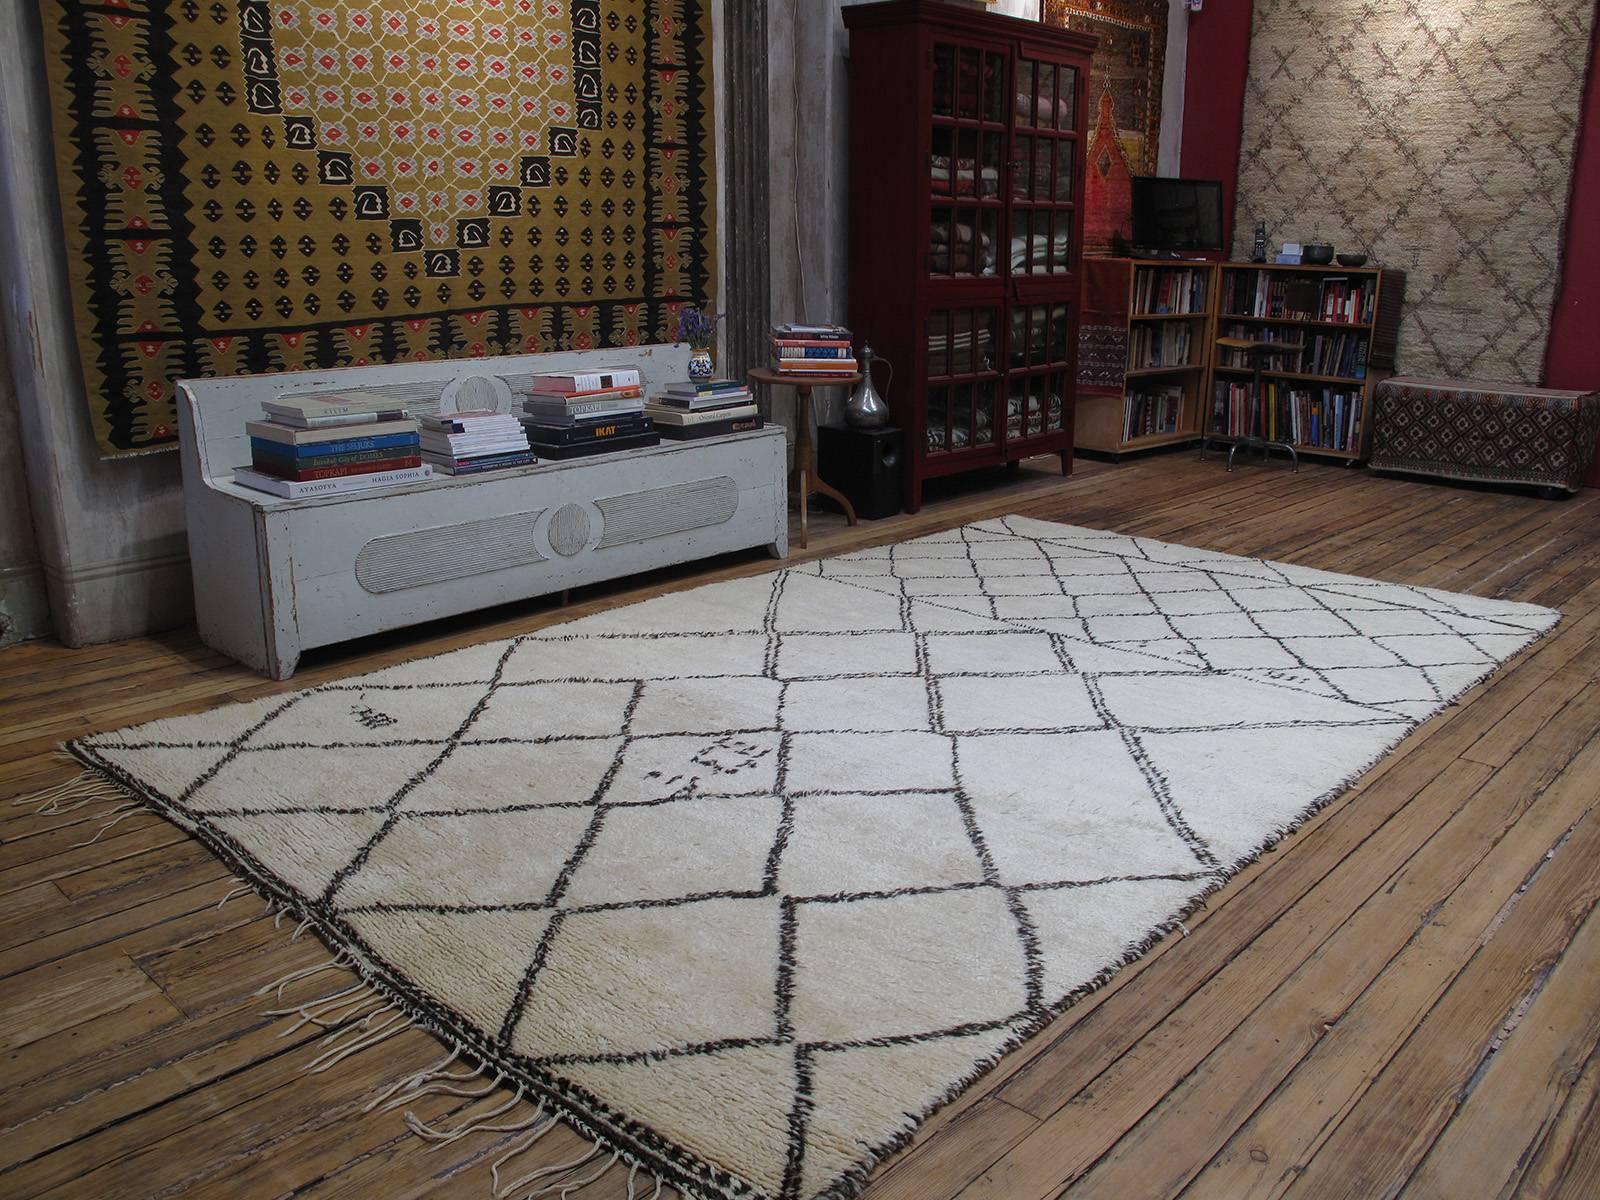 A superb old Moroccan Berber carpet of rare, large proportions, by the Beni Ouarain tribes. The classical diamond grid theme is executed with great dynamism, featuring many interruptions and whimsical details. The weave is dense, the wool quality is